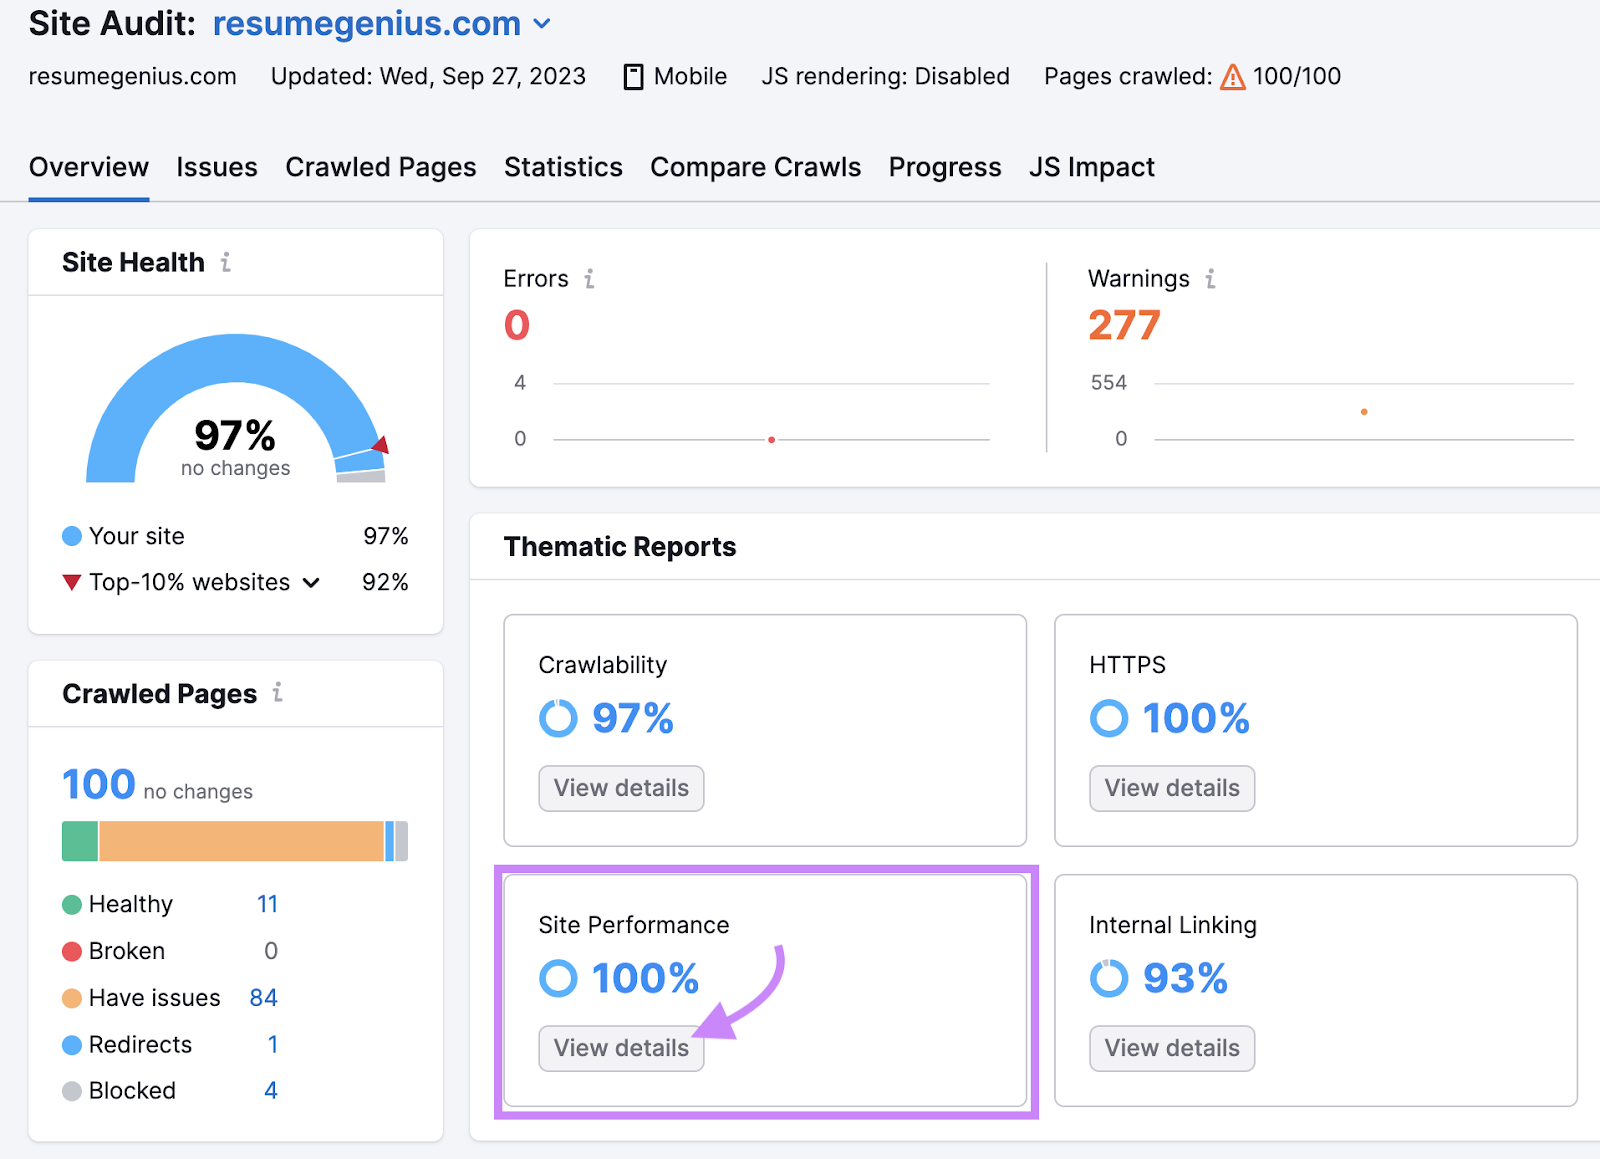 “Site Performance” box highlighted in Site Audit dashboard